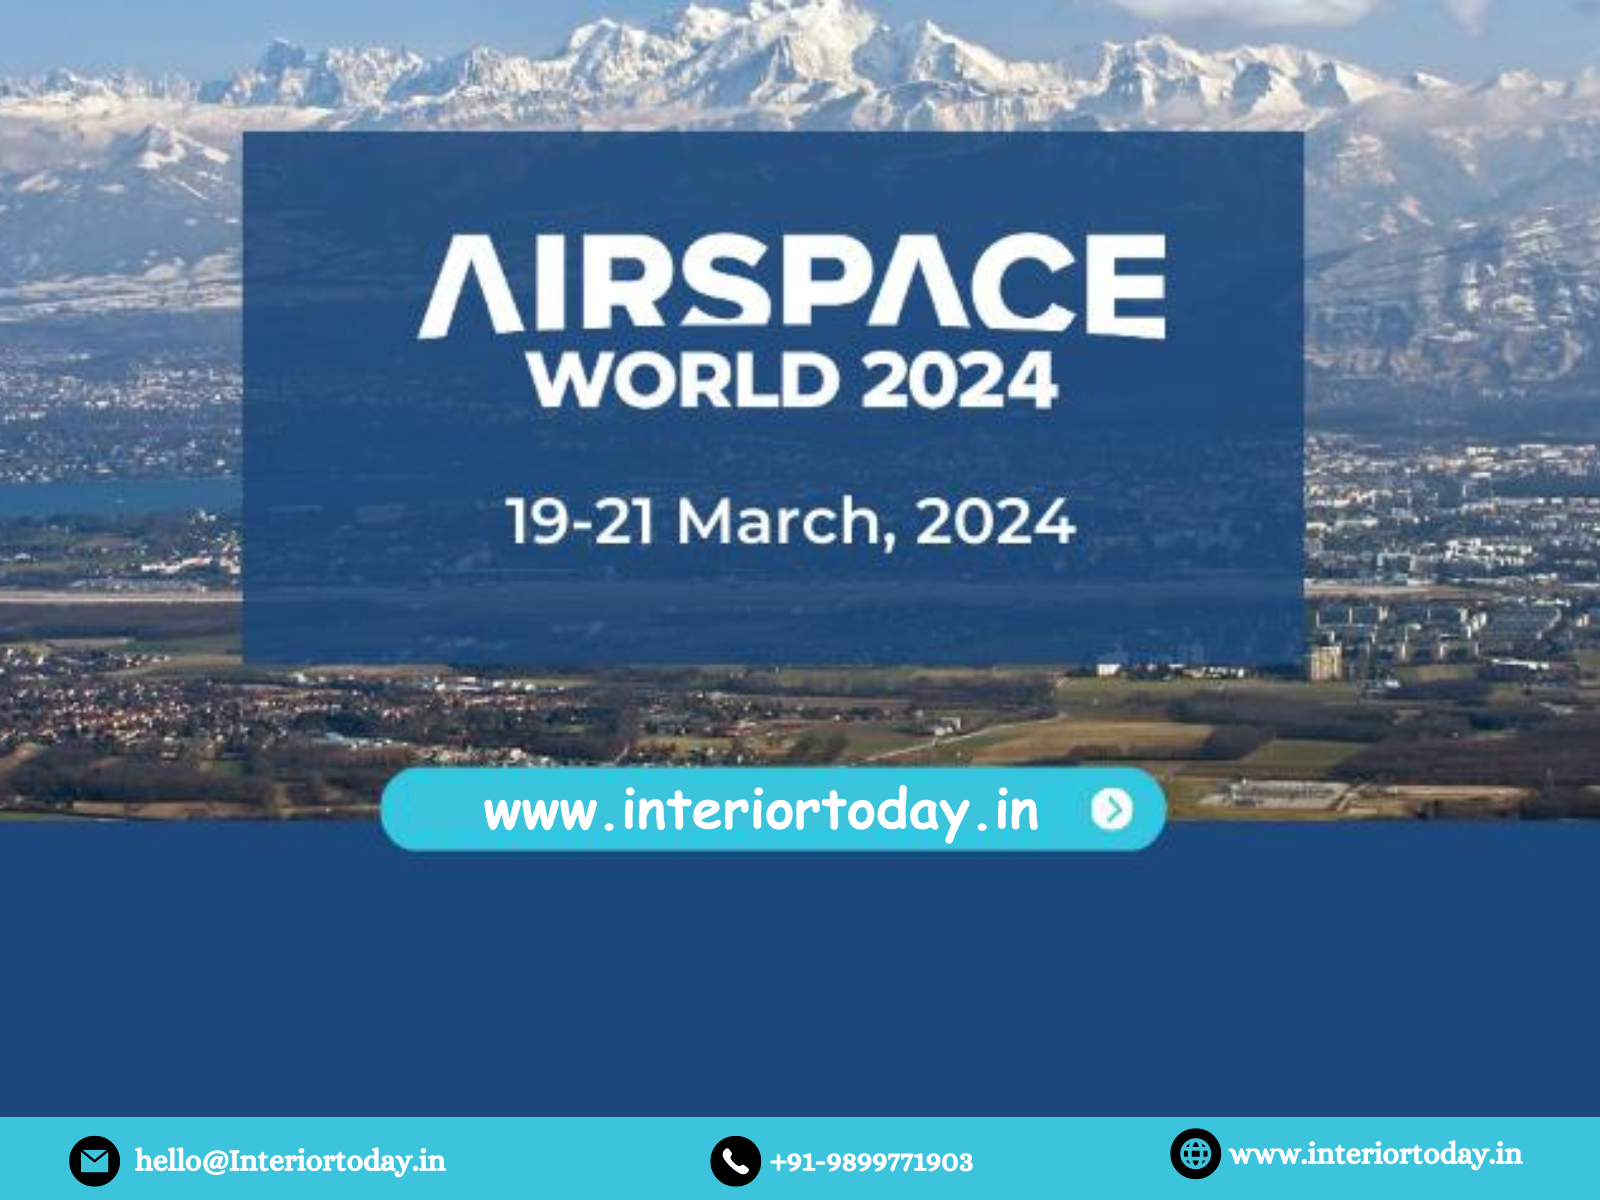 Interior Today Exhibition Booth Builder Company At Airspace World xpo 2024 Geneva, Spain